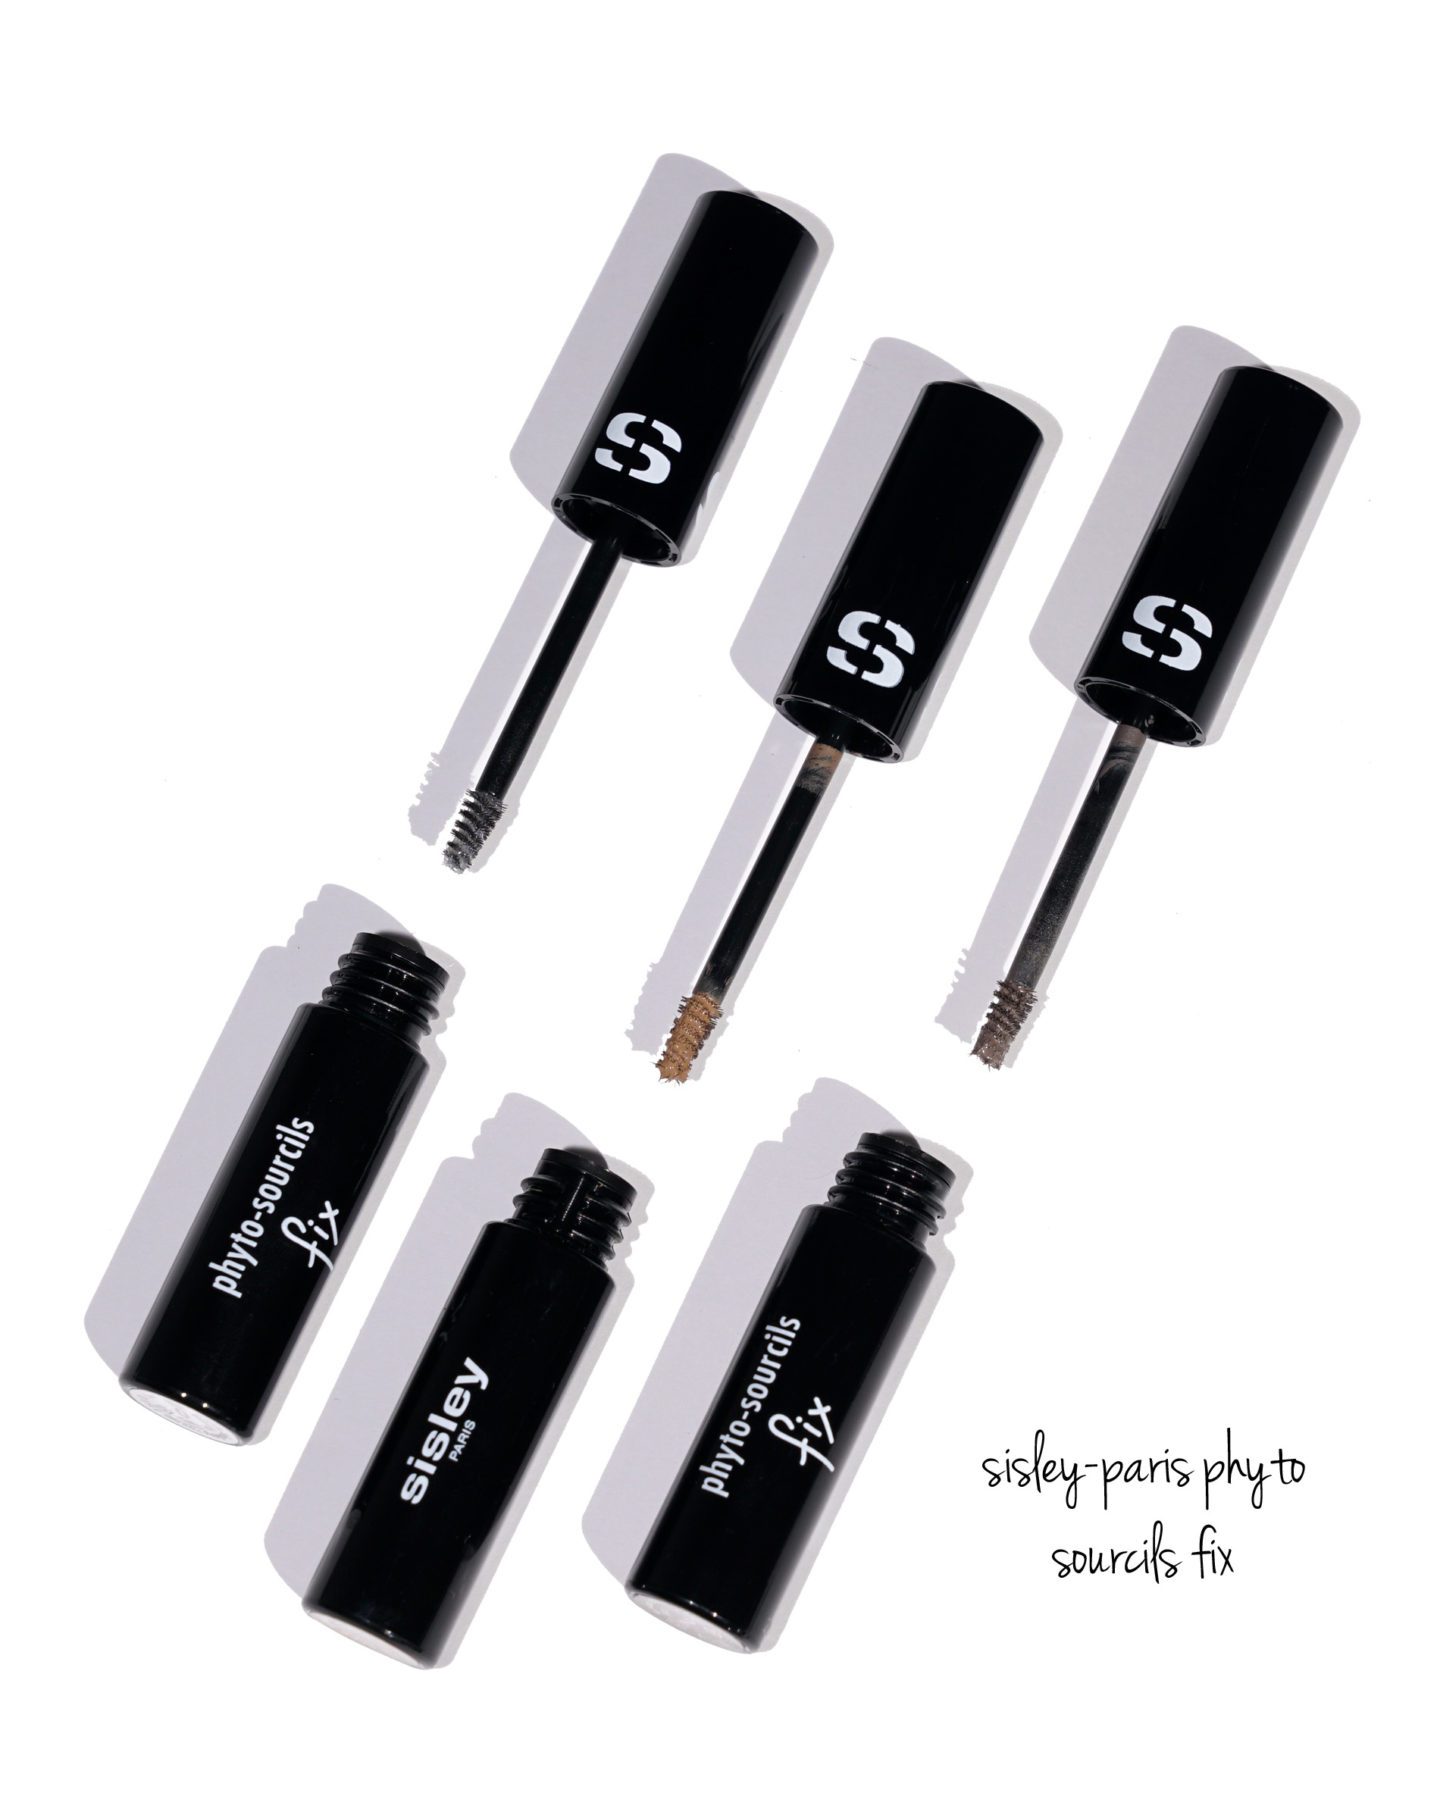 Sisley Phyto-Sourcils Fix Thickening & Setting Gel for Eyebrows